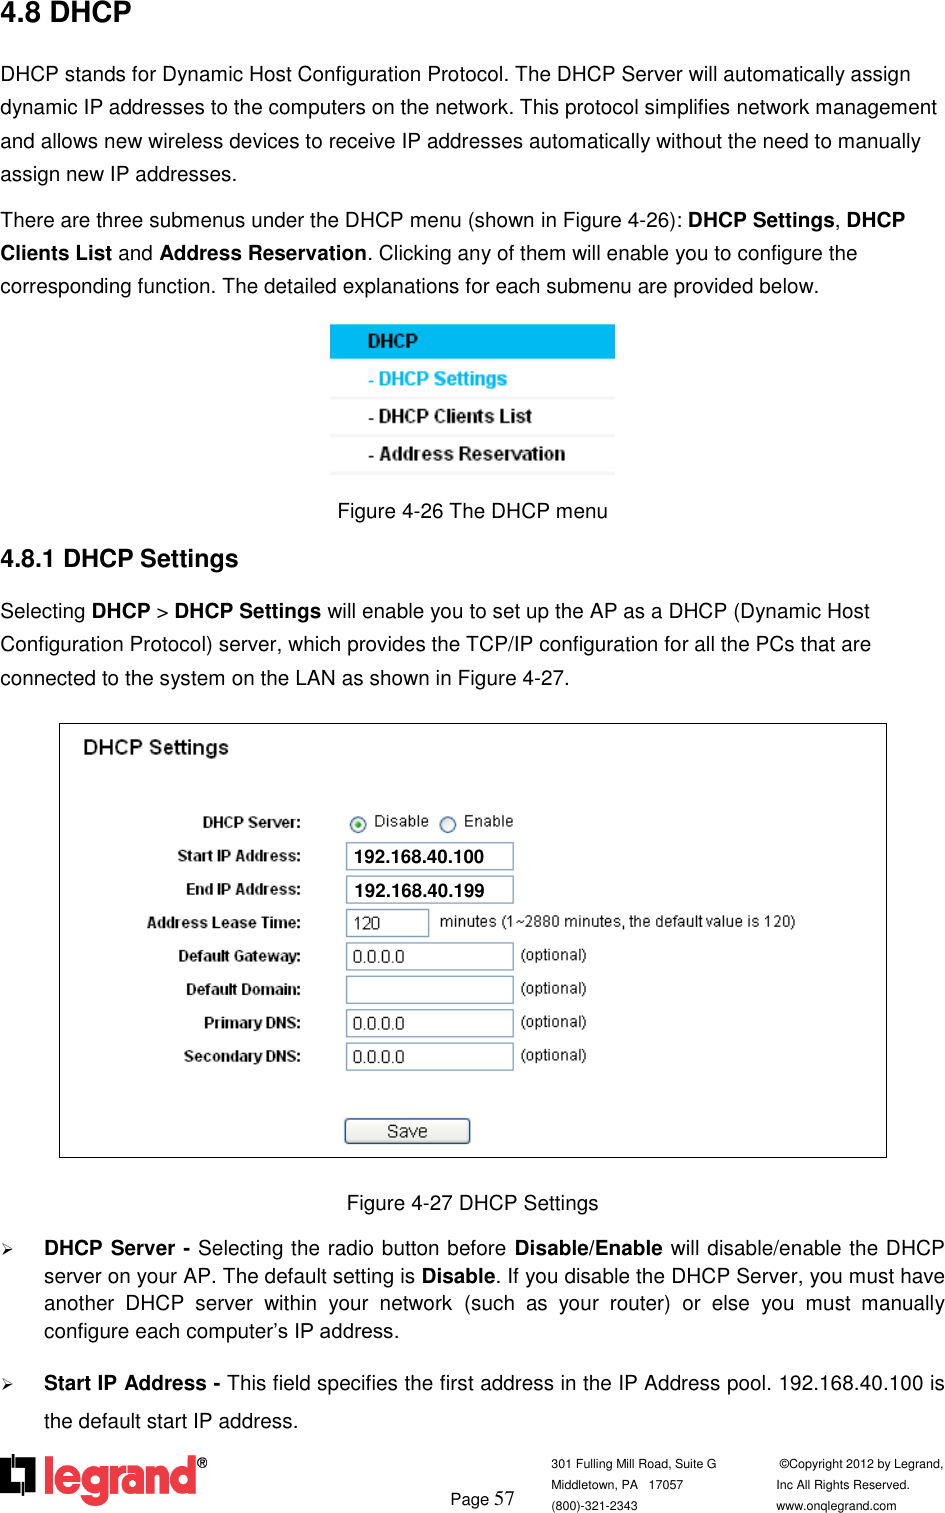         Page 57  301 Fulling Mill Road, Suite G            ©Copyright 2012 by Legrand,  Middletown, PA   17057               Inc All Rights Reserved. (800)-321-2343    www.onqlegrand.com              4.8 DHCP DHCP stands for Dynamic Host Configuration Protocol. The DHCP Server will automatically assign dynamic IP addresses to the computers on the network. This protocol simplifies network management and allows new wireless devices to receive IP addresses automatically without the need to manually assign new IP addresses.  There are three submenus under the DHCP menu (shown in Figure 4-26): DHCP Settings, DHCP Clients List and Address Reservation. Clicking any of them will enable you to configure the corresponding function. The detailed explanations for each submenu are provided below.  Figure 4-26 The DHCP menu 4.8.1 DHCP Settings Selecting DHCP &gt; DHCP Settings will enable you to set up the AP as a DHCP (Dynamic Host Configuration Protocol) server, which provides the TCP/IP configuration for all the PCs that are connected to the system on the LAN as shown in Figure 4-27.  Figure 4-27 DHCP Settings  DHCP Server - Selecting the radio button before Disable/Enable will disable/enable the DHCP server on your AP. The default setting is Disable. If you disable the DHCP Server, you must have another  DHCP  server  within  your  network  (such  as  your  router)  or  else  you  must  manually configure each computer’s IP address.  Start IP Address - This field specifies the first address in the IP Address pool. 192.168.40.100 is the default start IP address.  192.168.40.100 192.168.40.199 